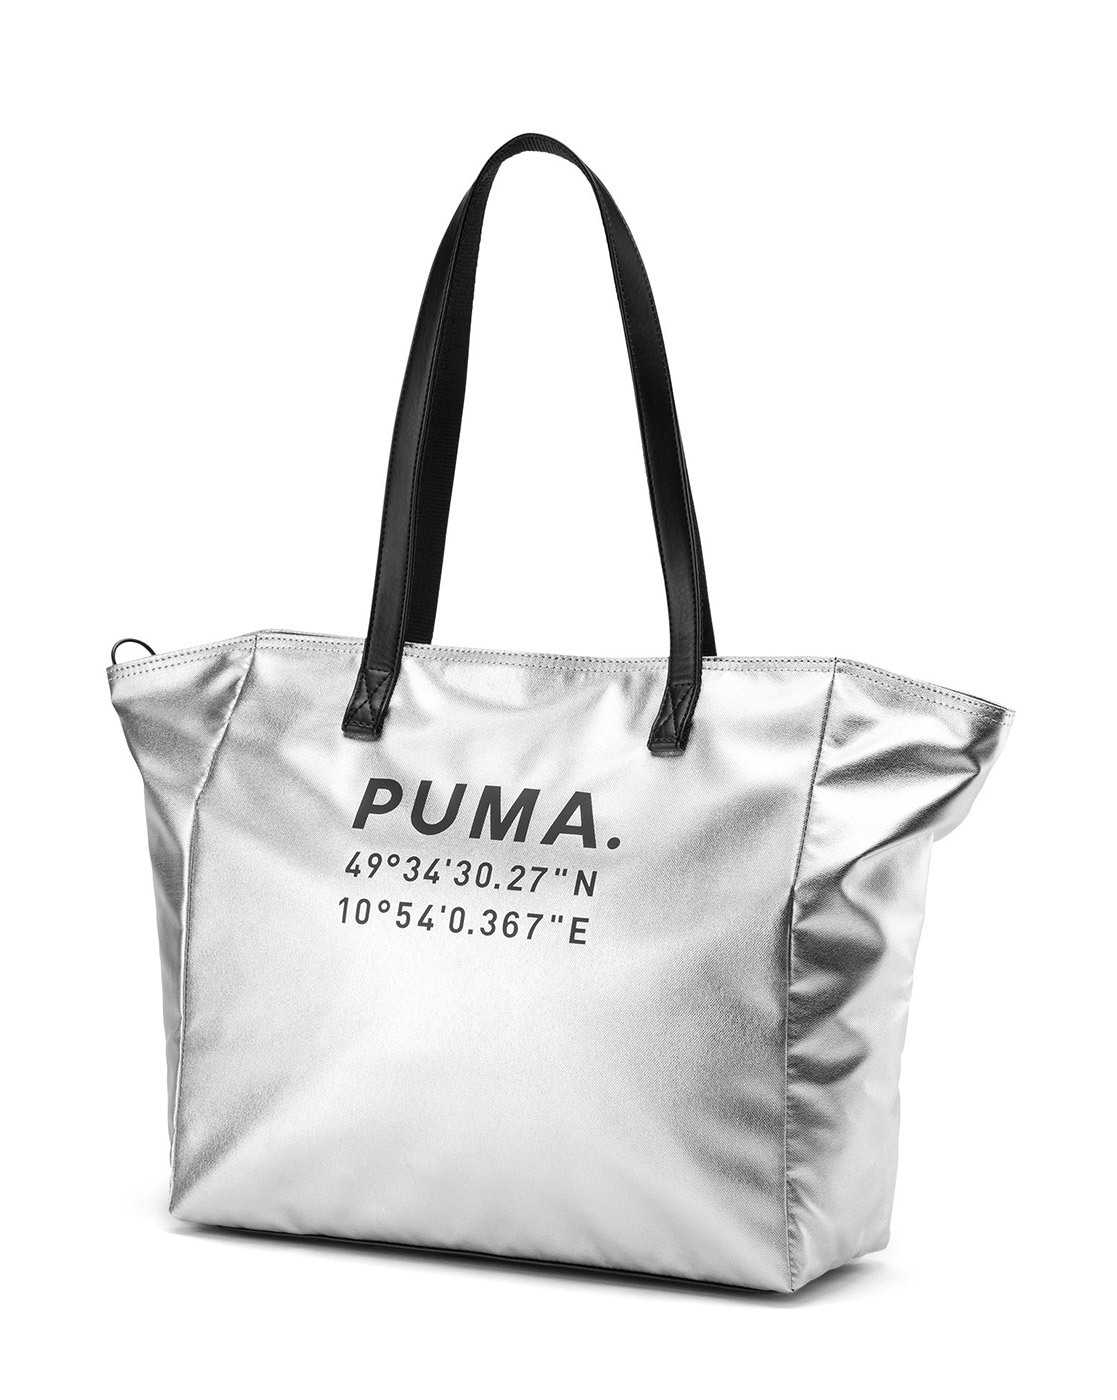 Buy Puma Women's Hand-Shoulder Bag (Rosso Corsa) at Amazon.in